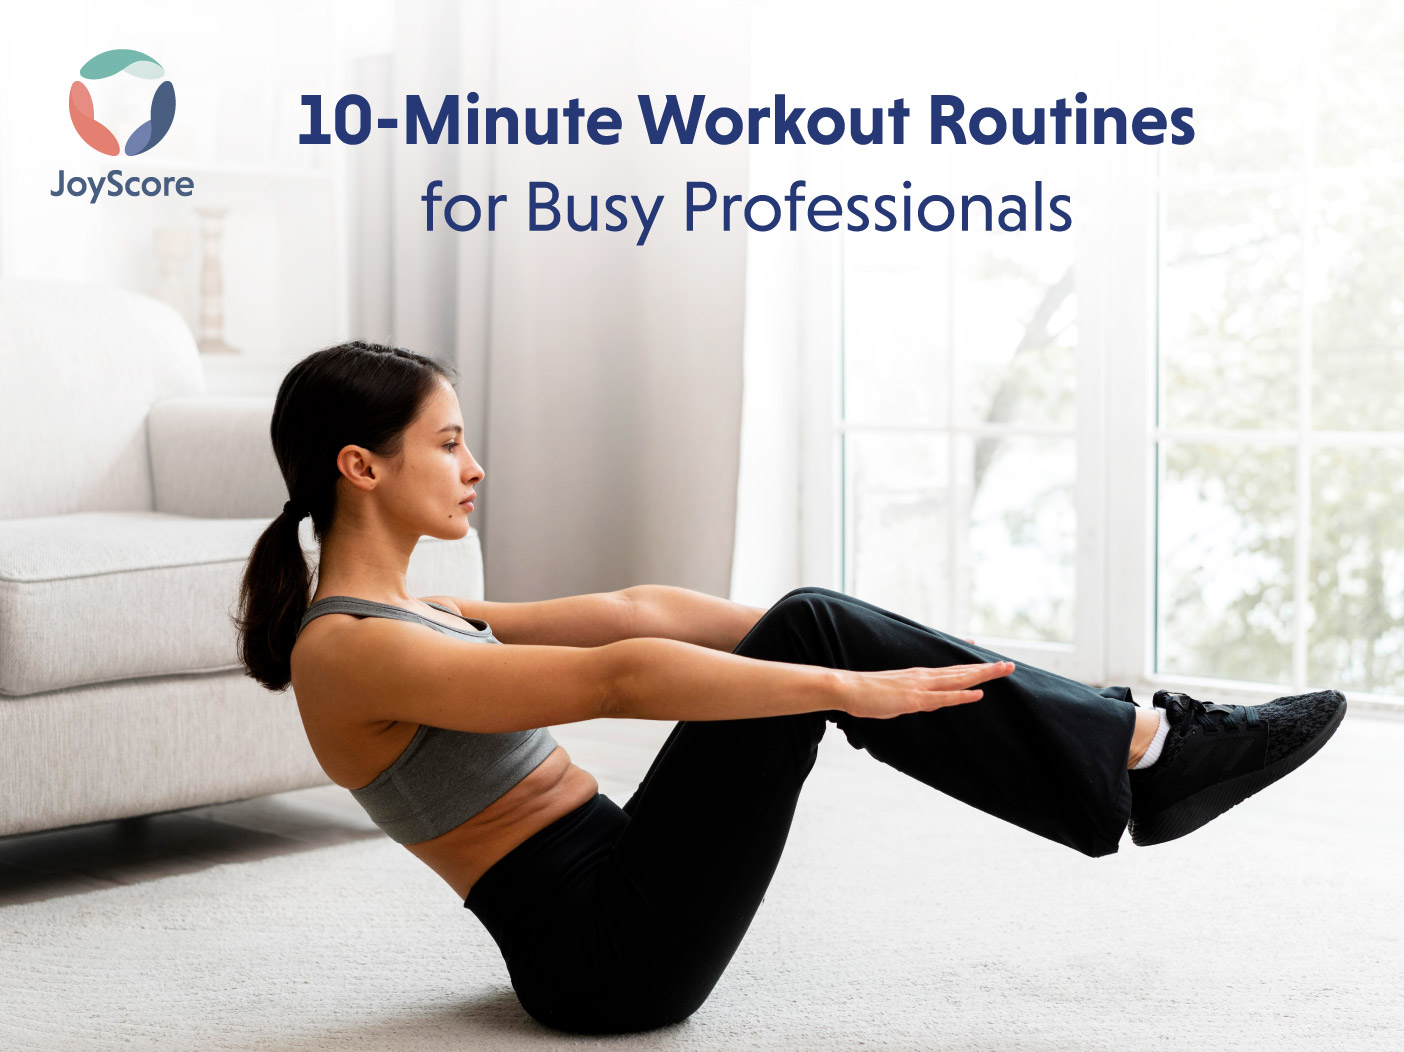 Efficient 10-Minute Workout Routines for Busy Professionals